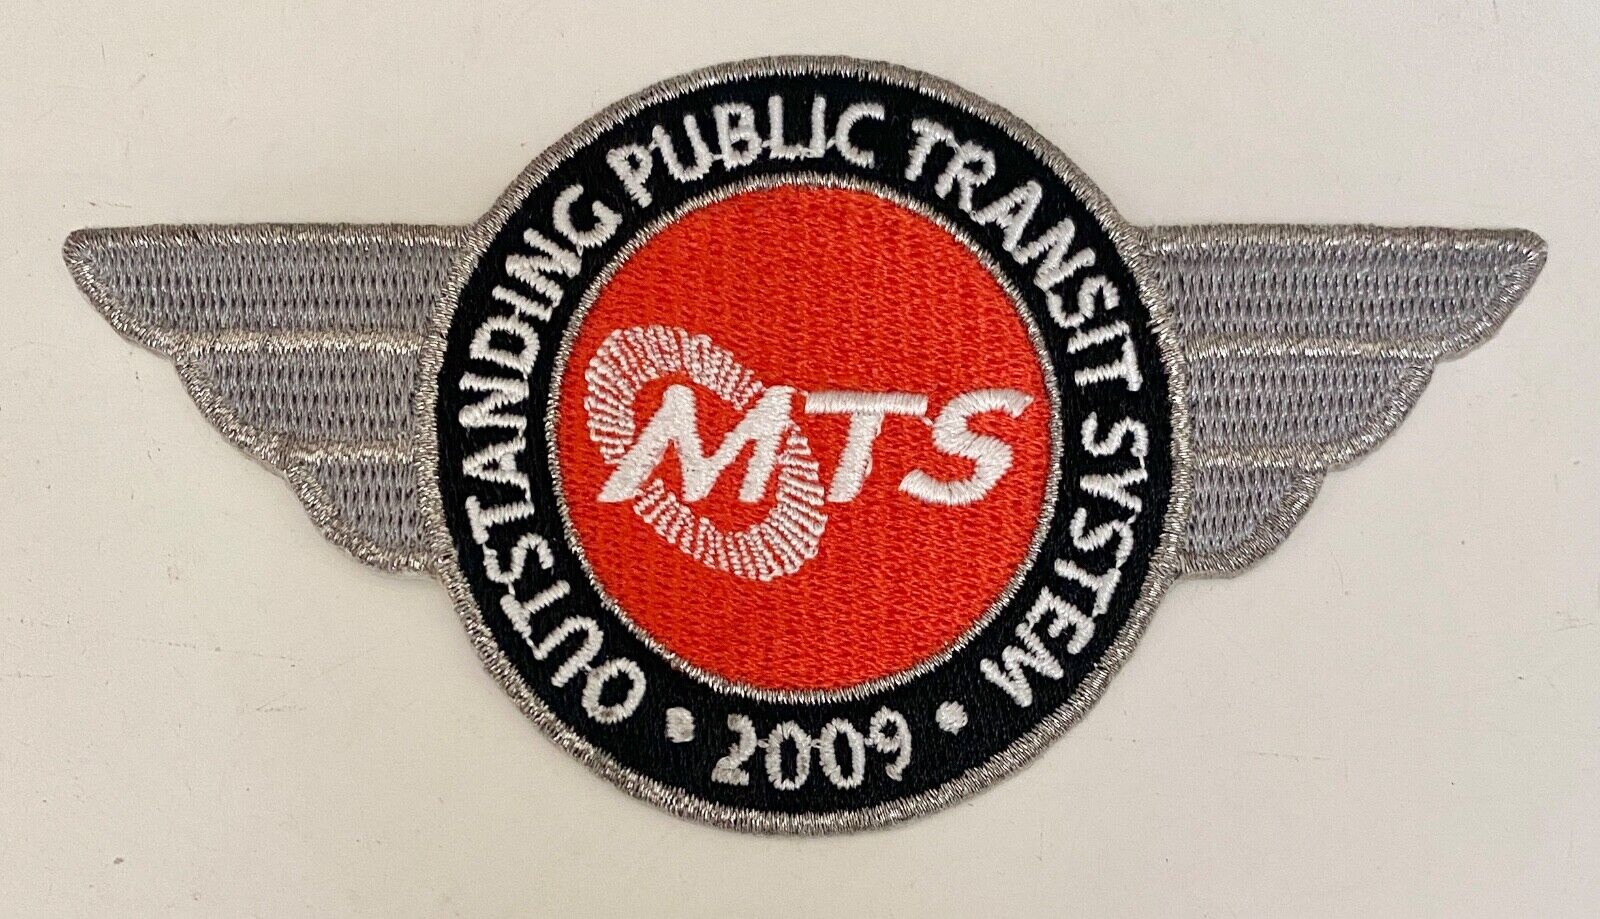 COLLECTIBLE 2009 MTS Outstanding Public Transit System Patch NEW San Diego MINT